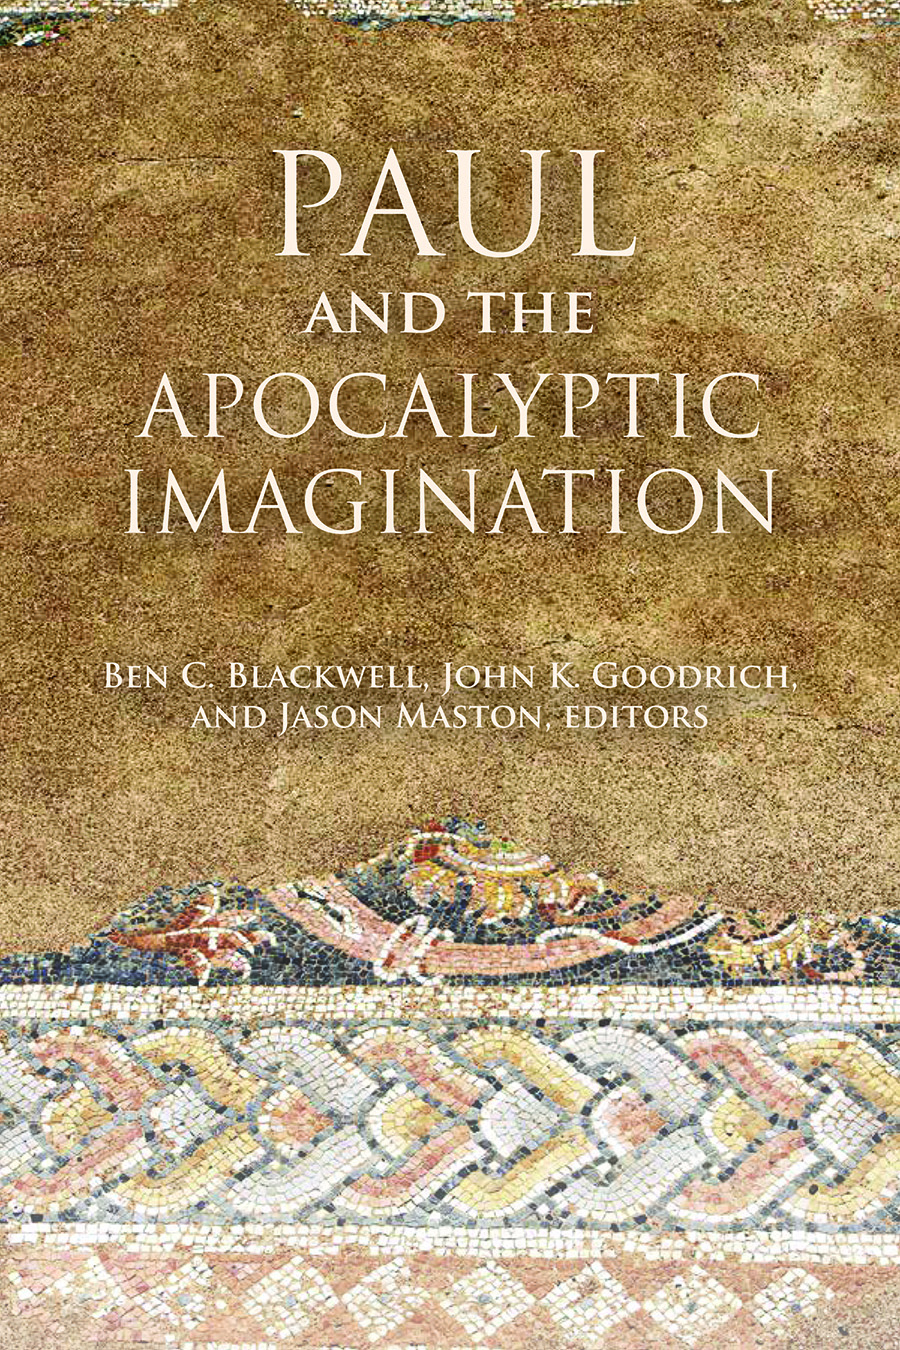 Paul and the Apocalyptic Imagination: An Introduction